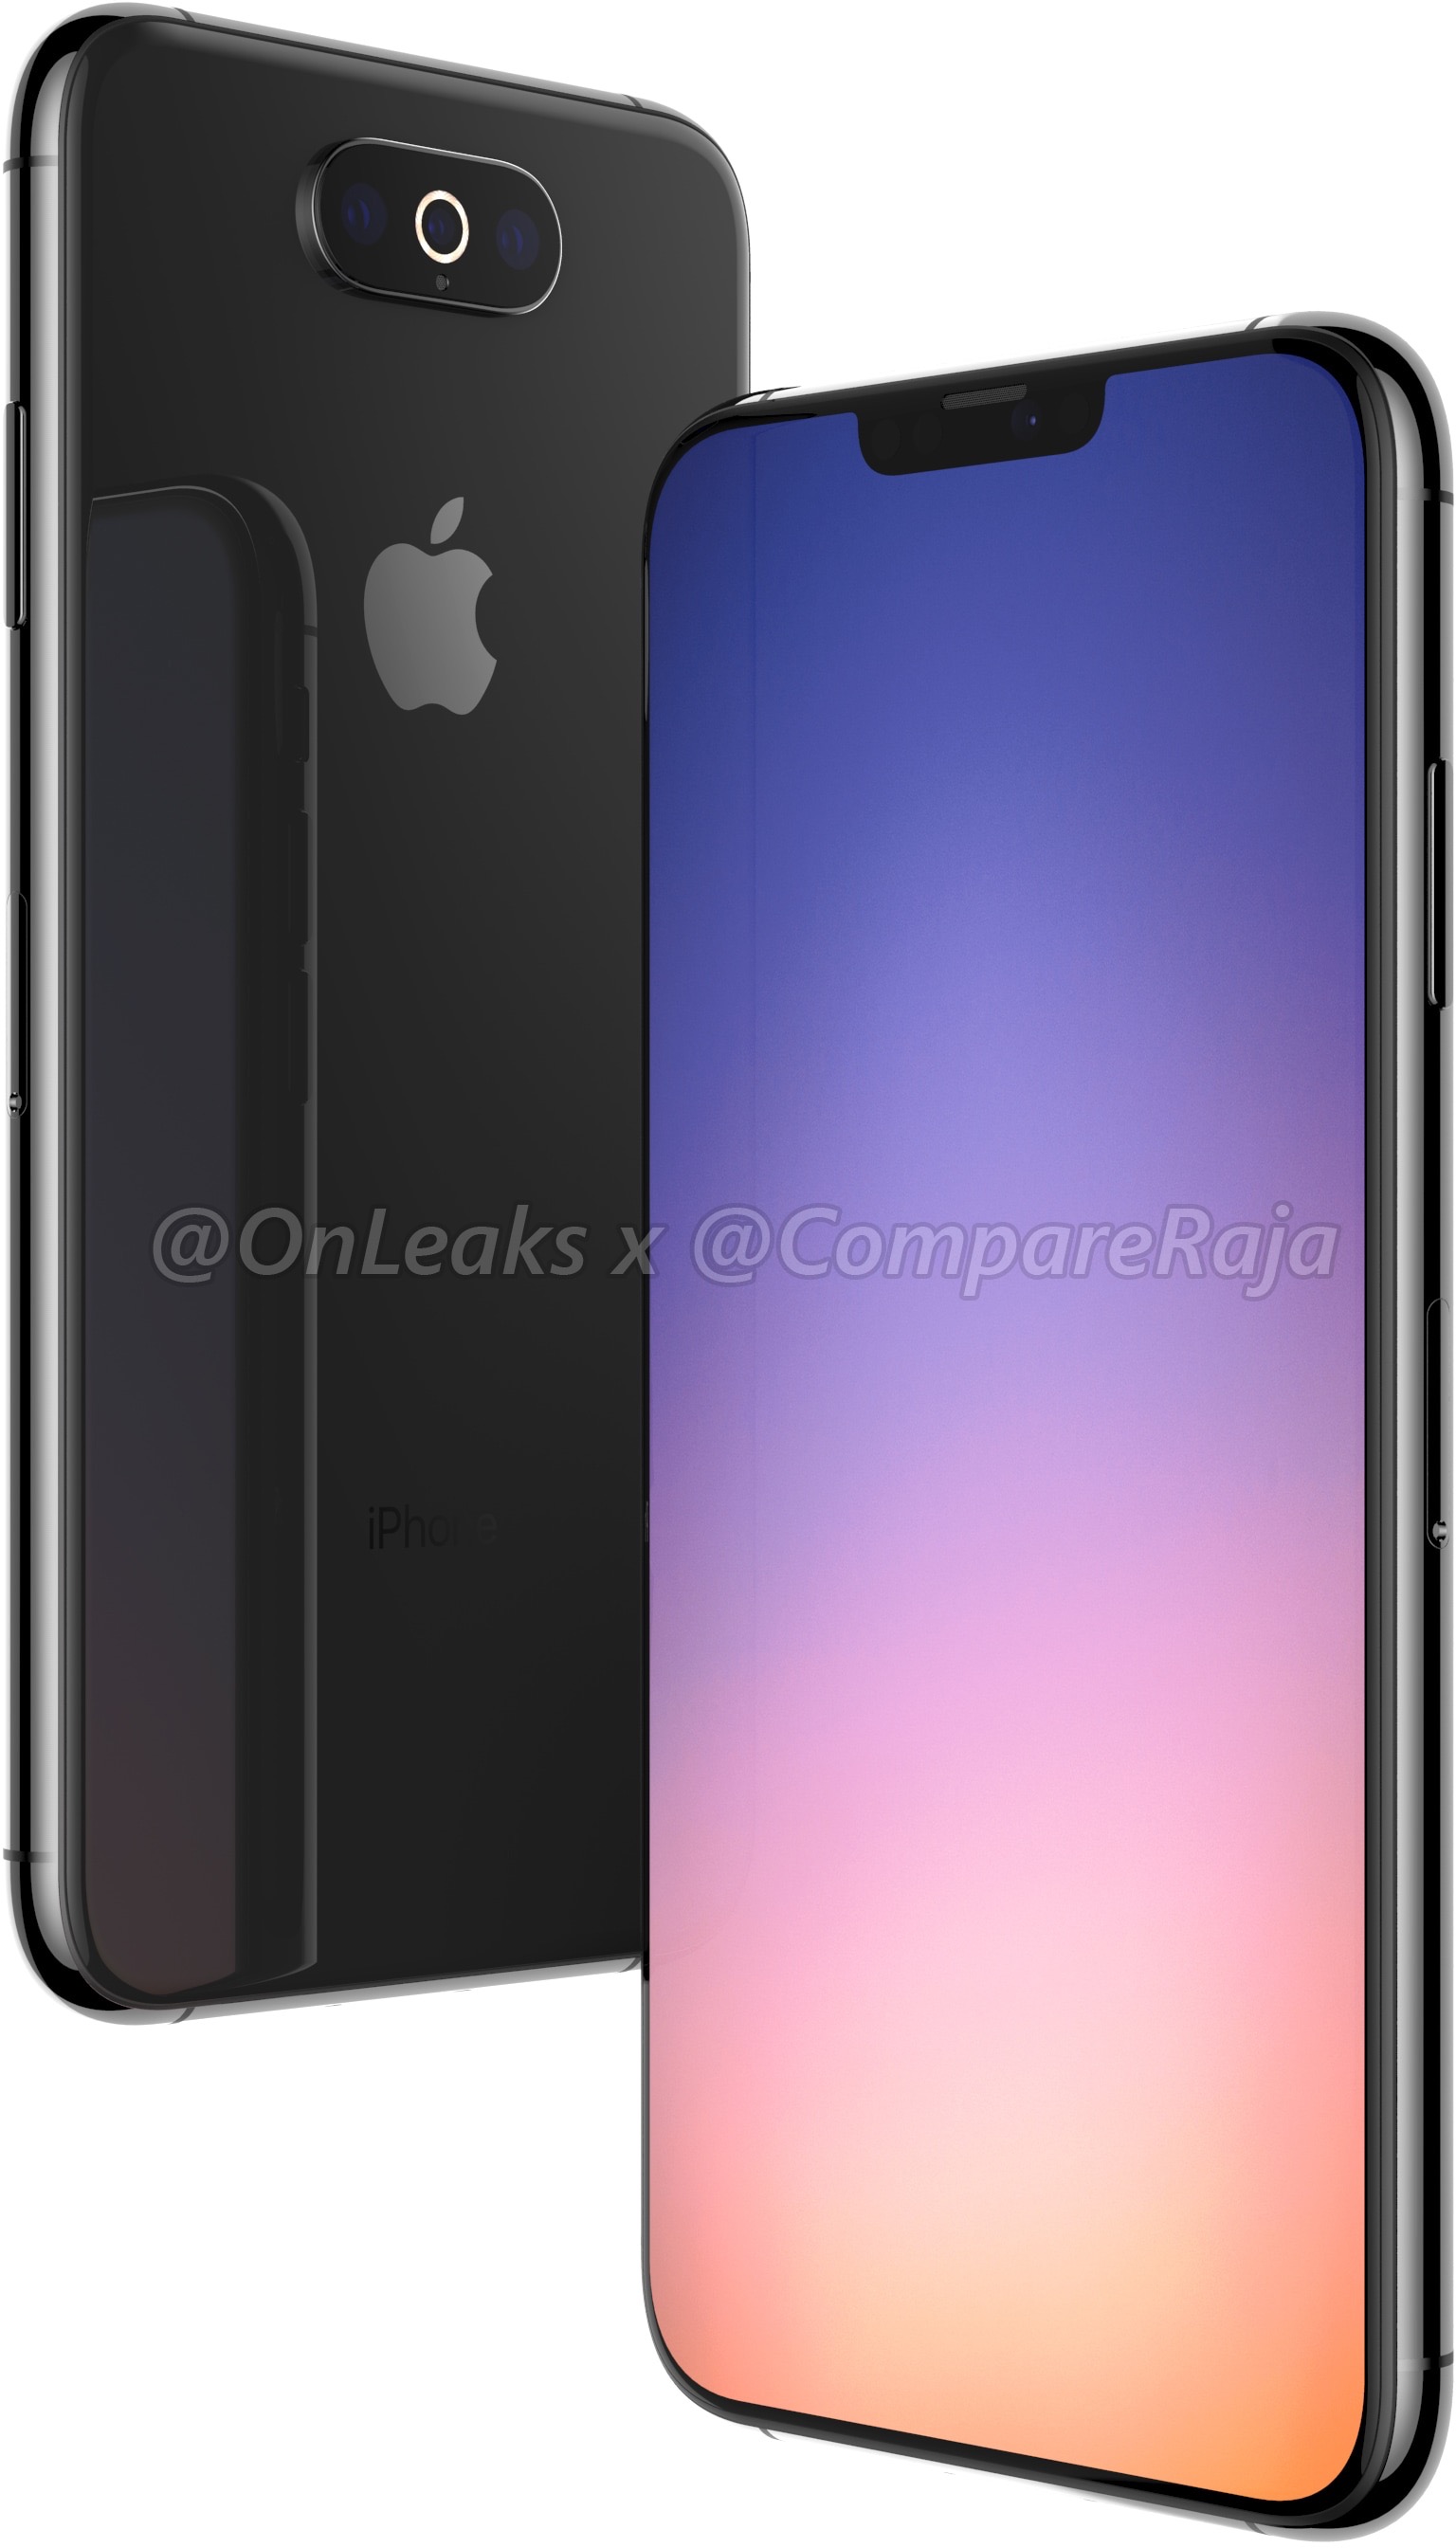 Render of a possible iPhone XS Max successor with three rear cameras